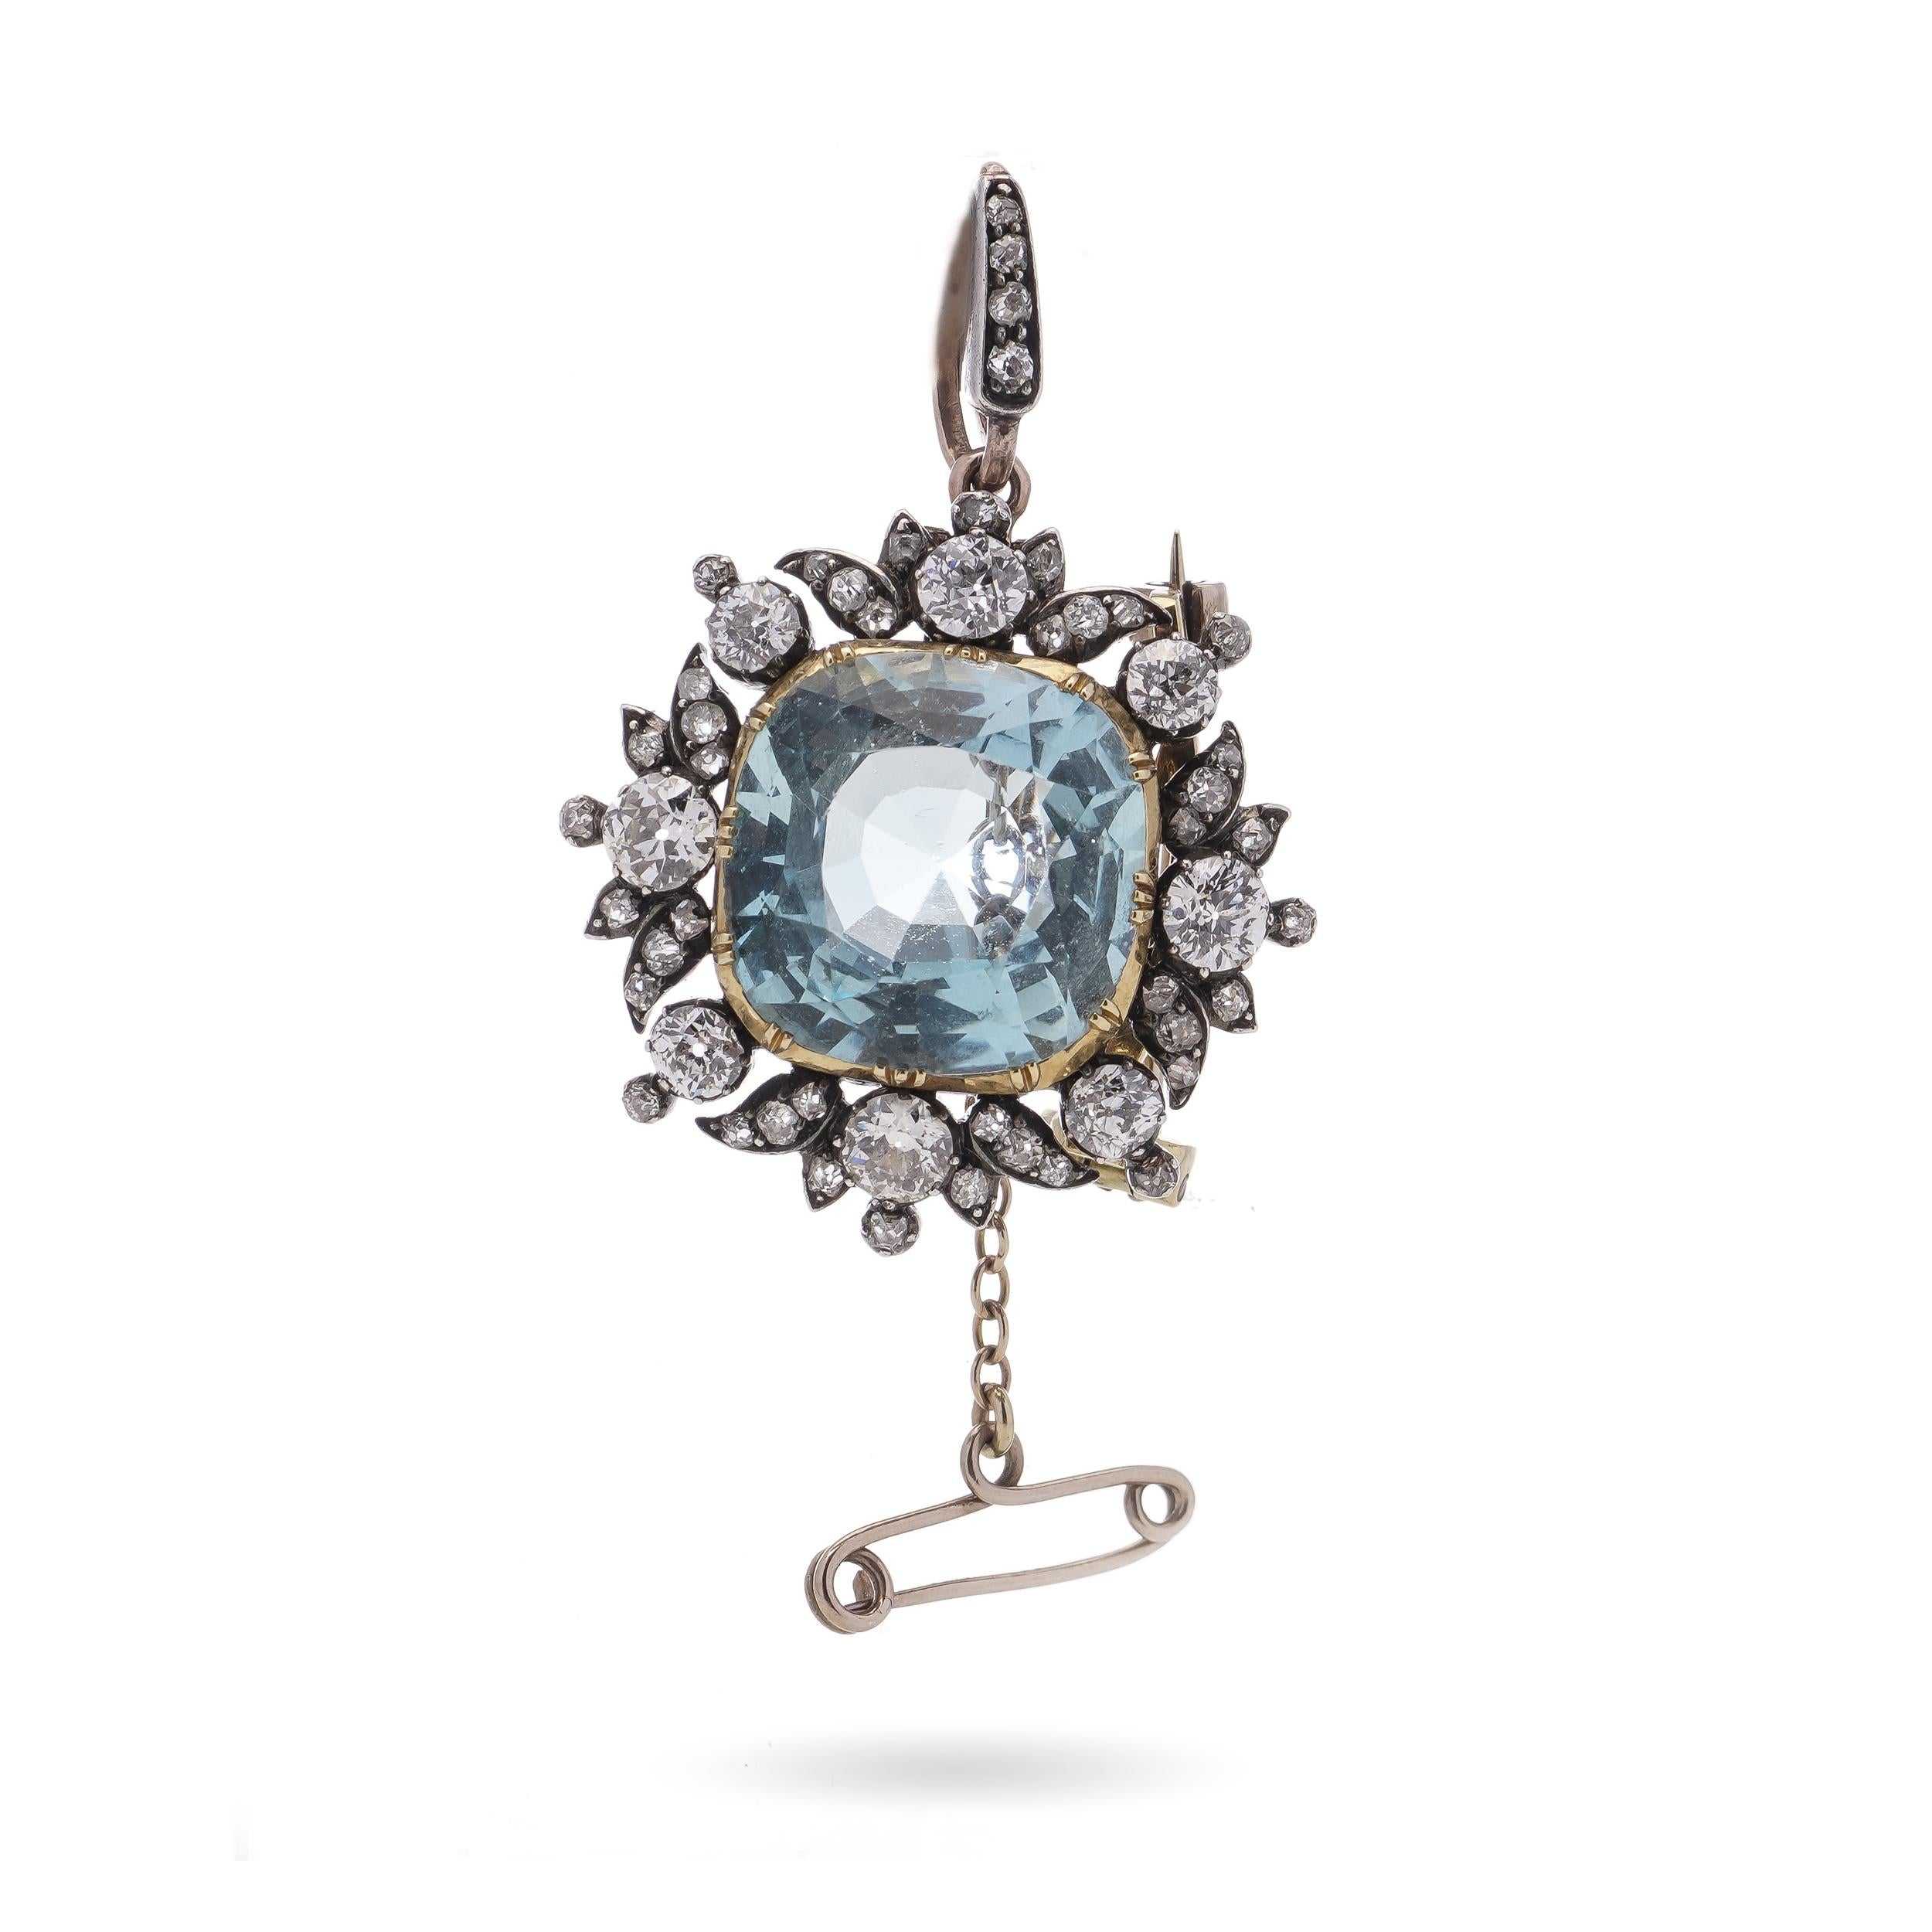 19th Century 9kt gold and silver 7.17 cts. of cushion-cut Aquamarine brooch In Good Condition For Sale In Braintree, GB